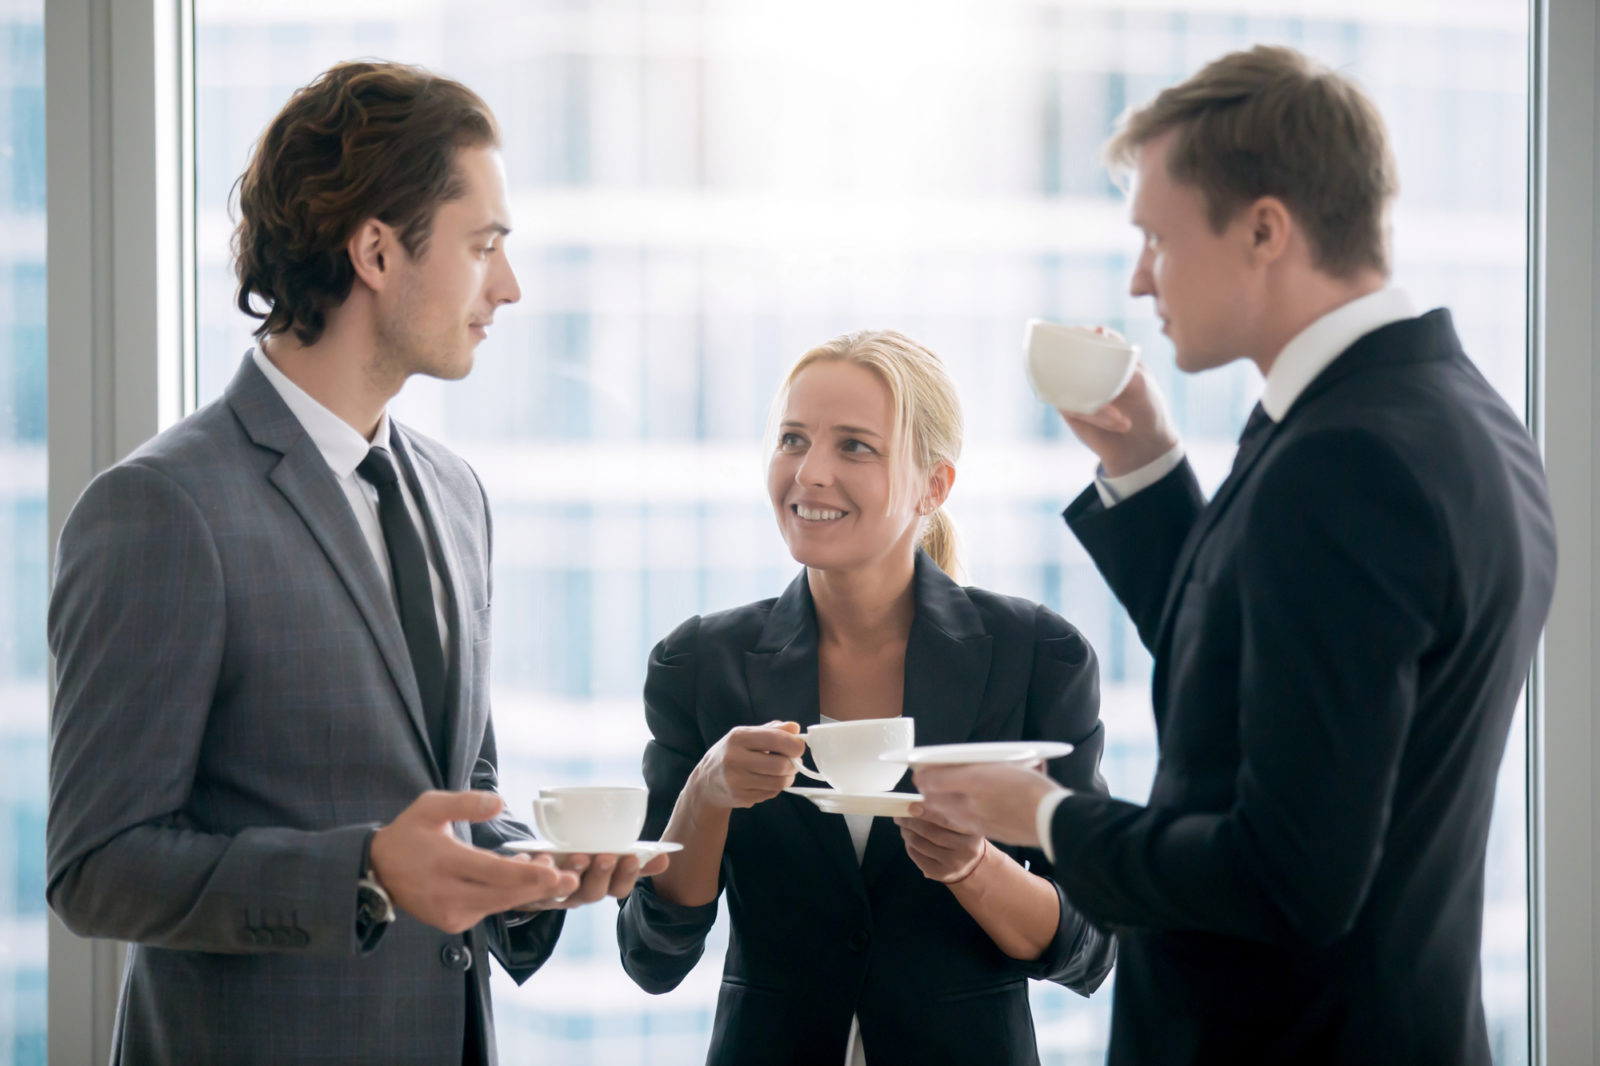 employees meeting over coffee